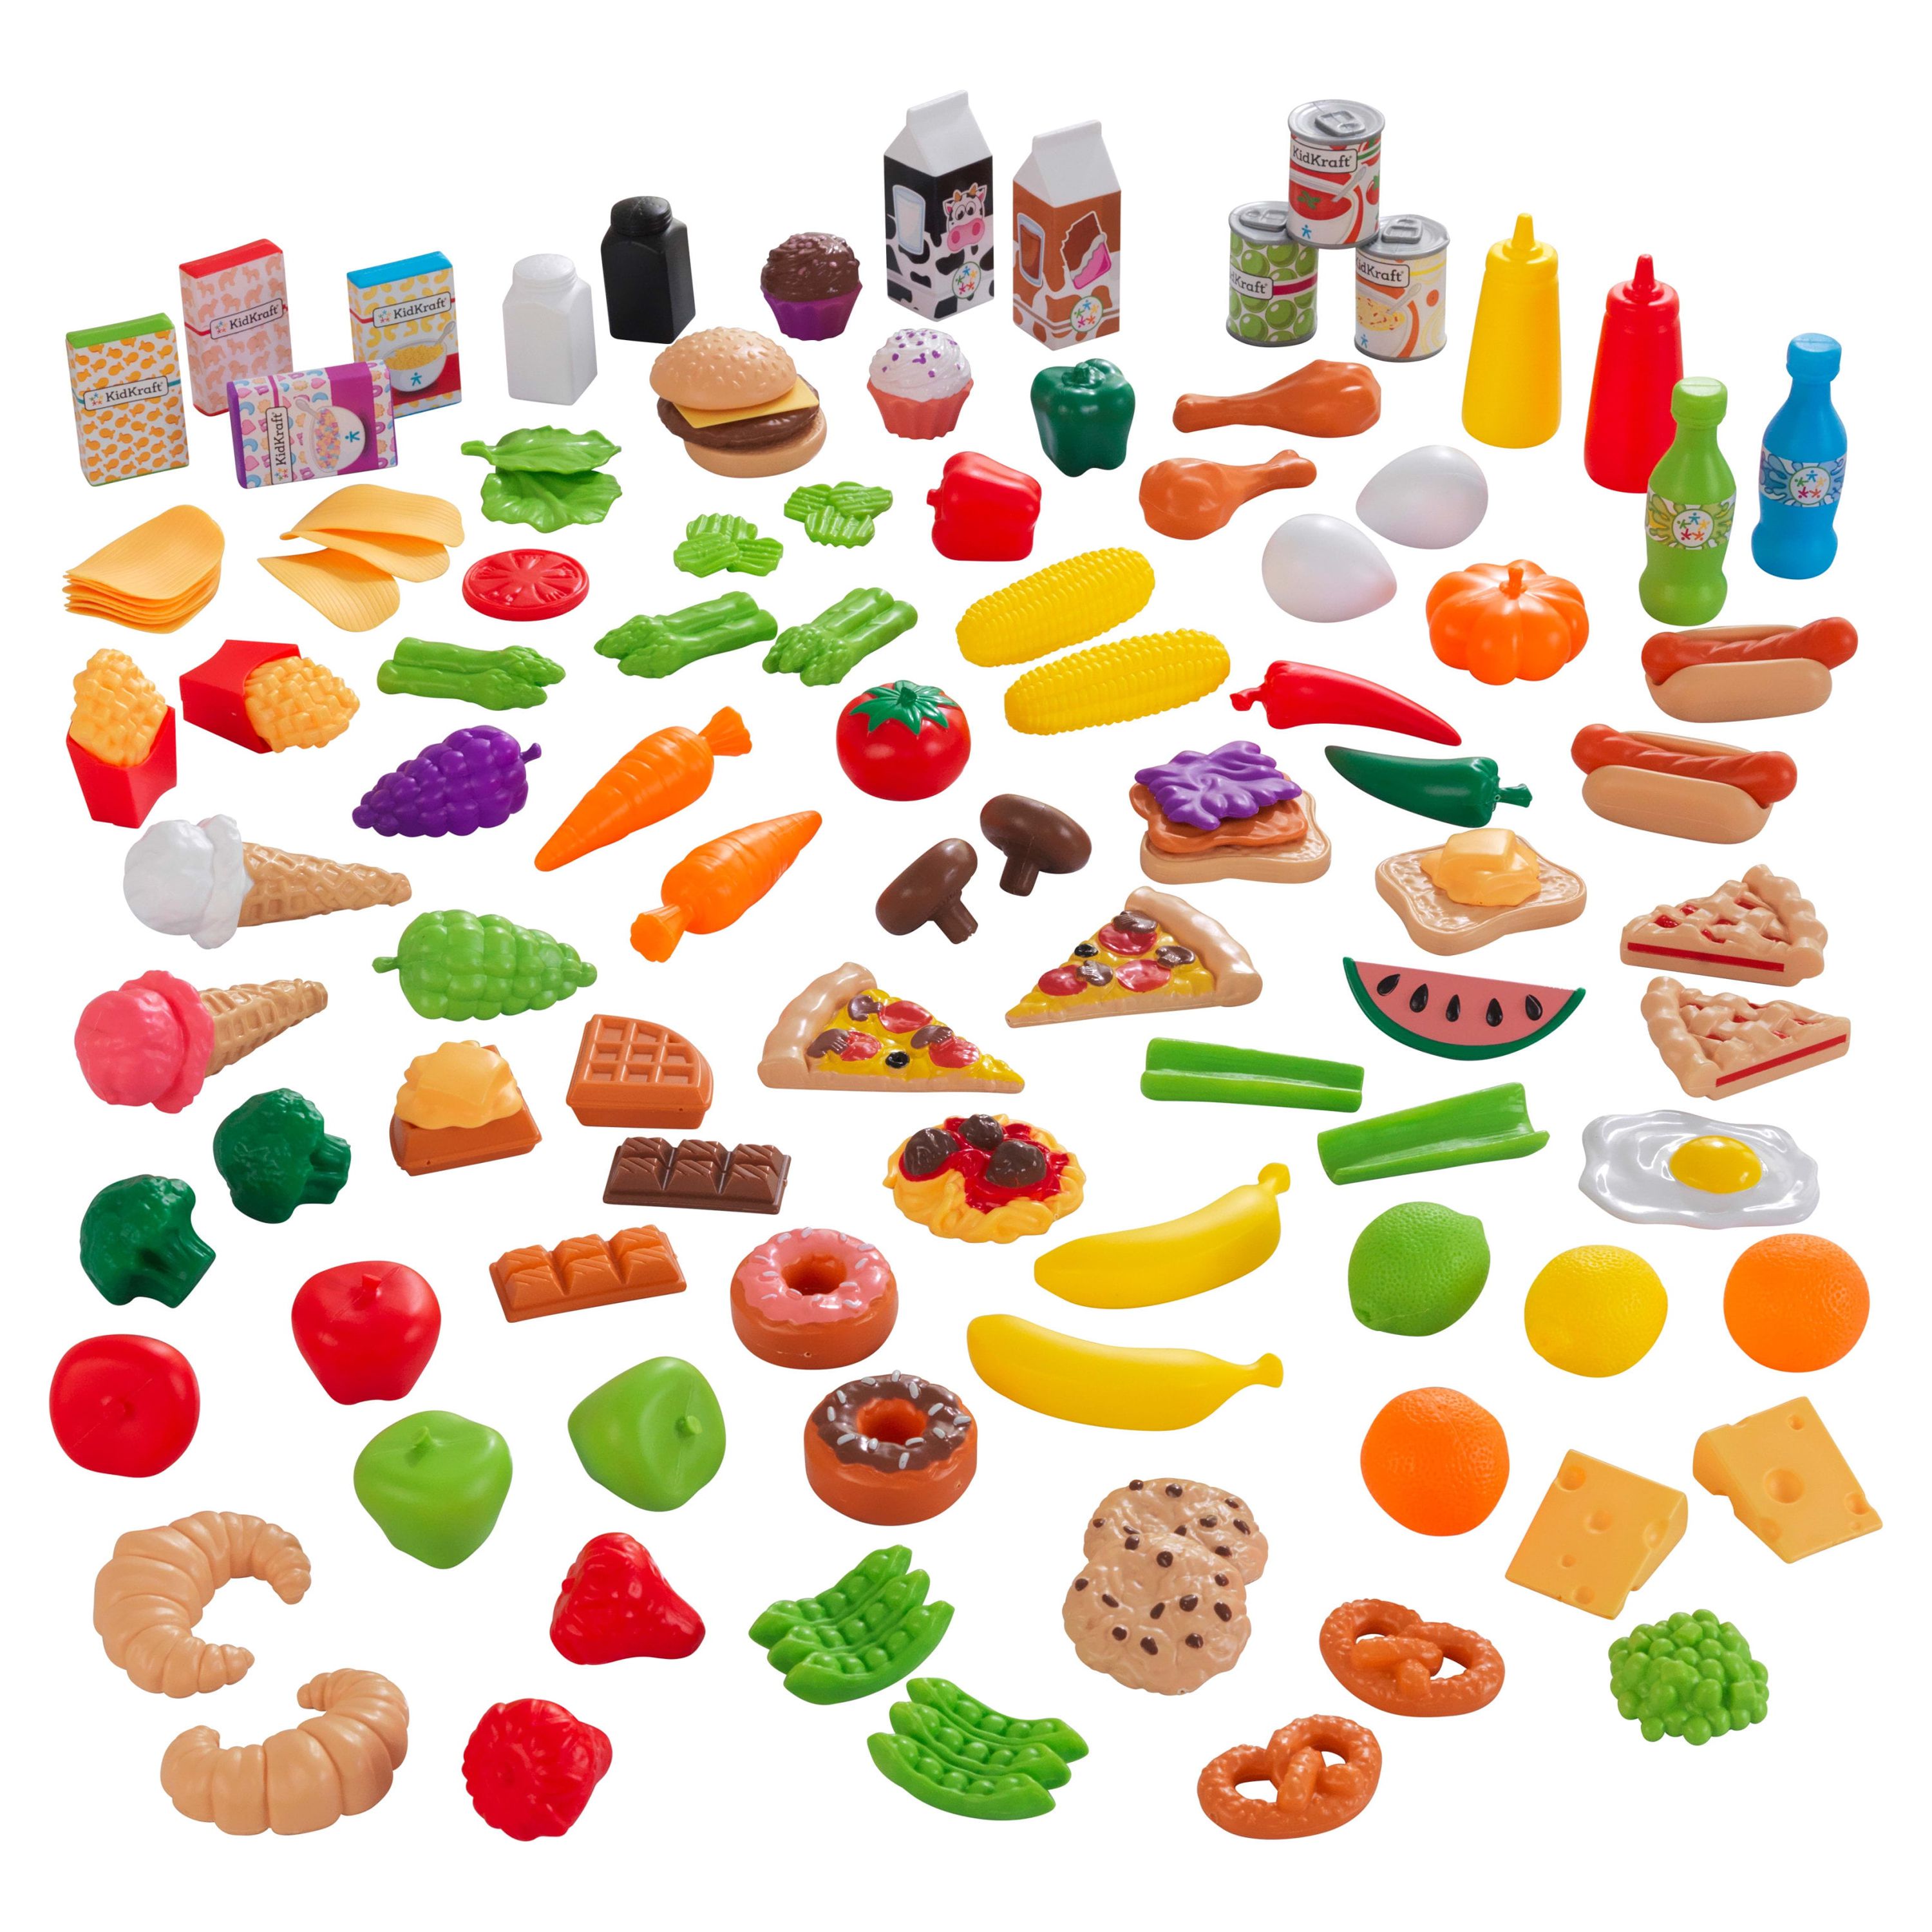 KidKraft 115-Piece Deluxe Tasty Treats Play Food Set, Plastic Grocery and Pantry Items - image 1 of 6